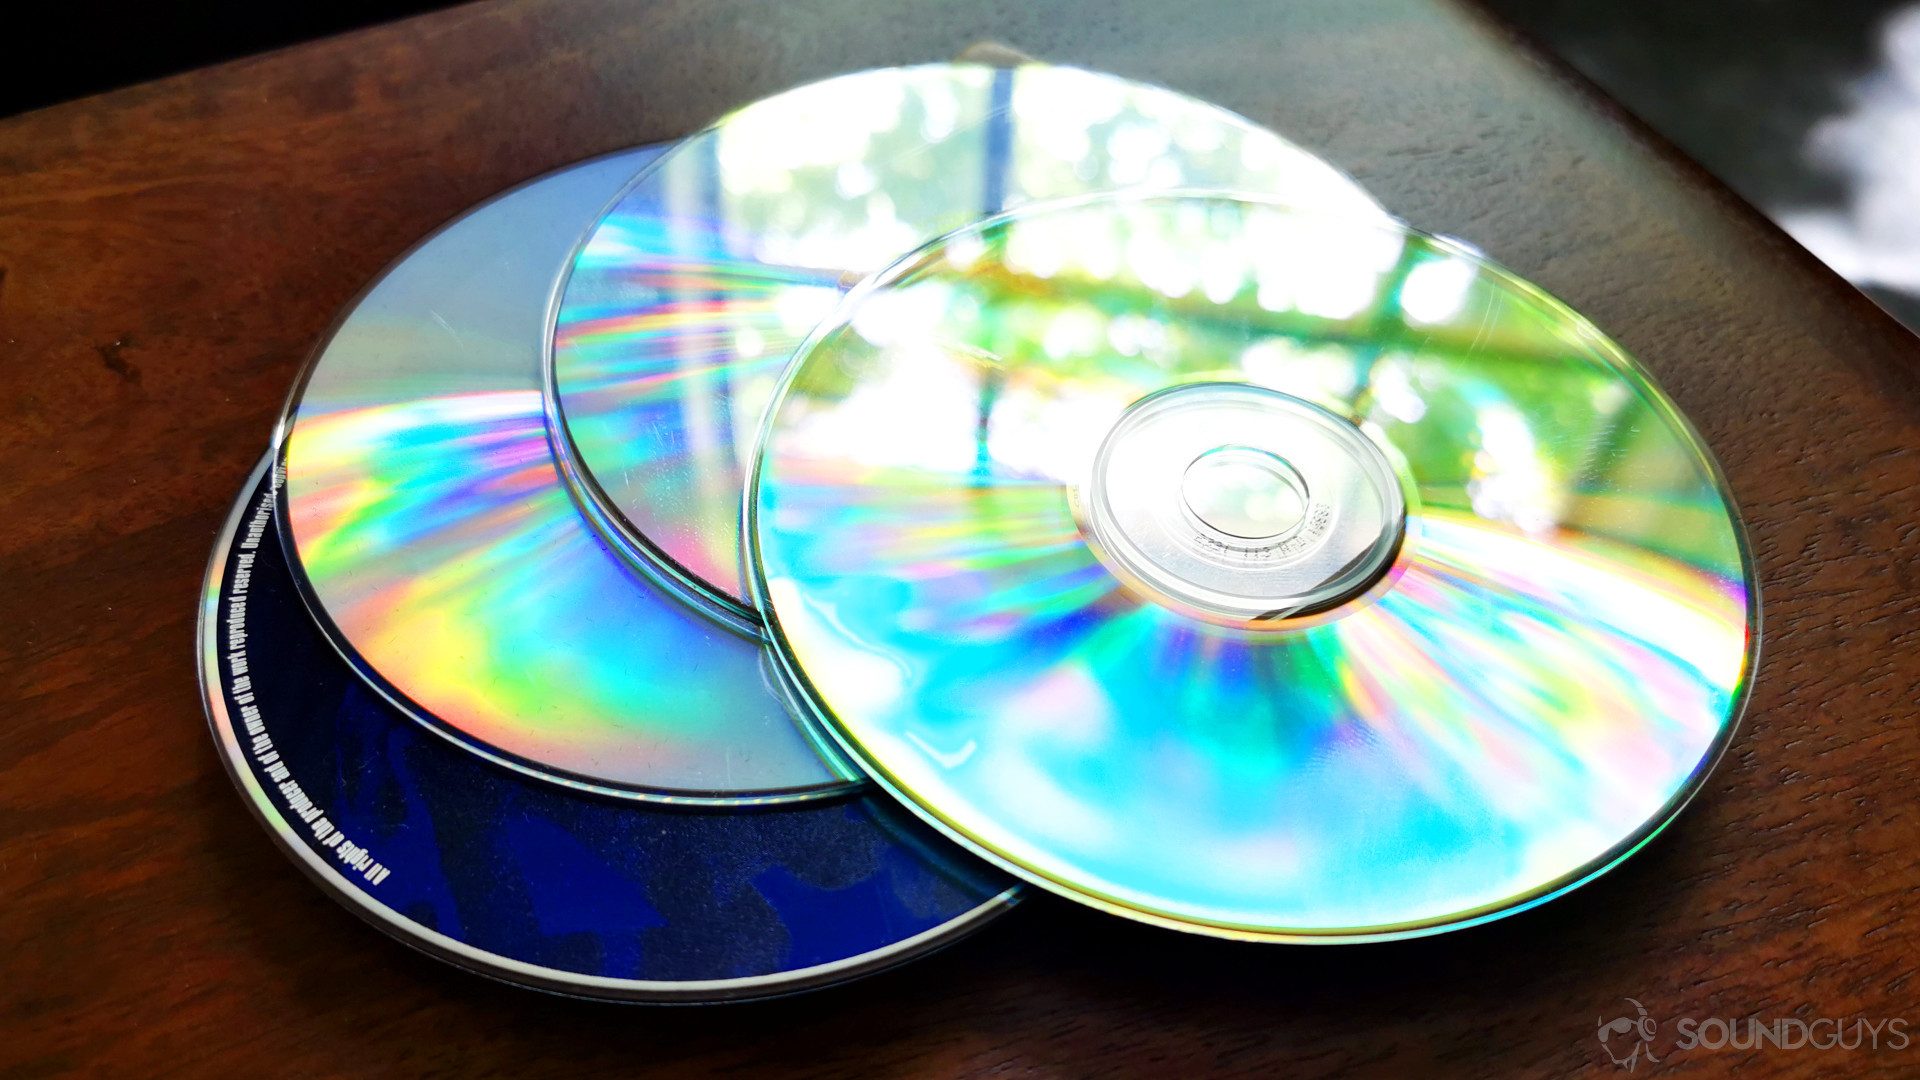 A photo of a stack of CDs on a wooden table - comparing cd quality bit-depth